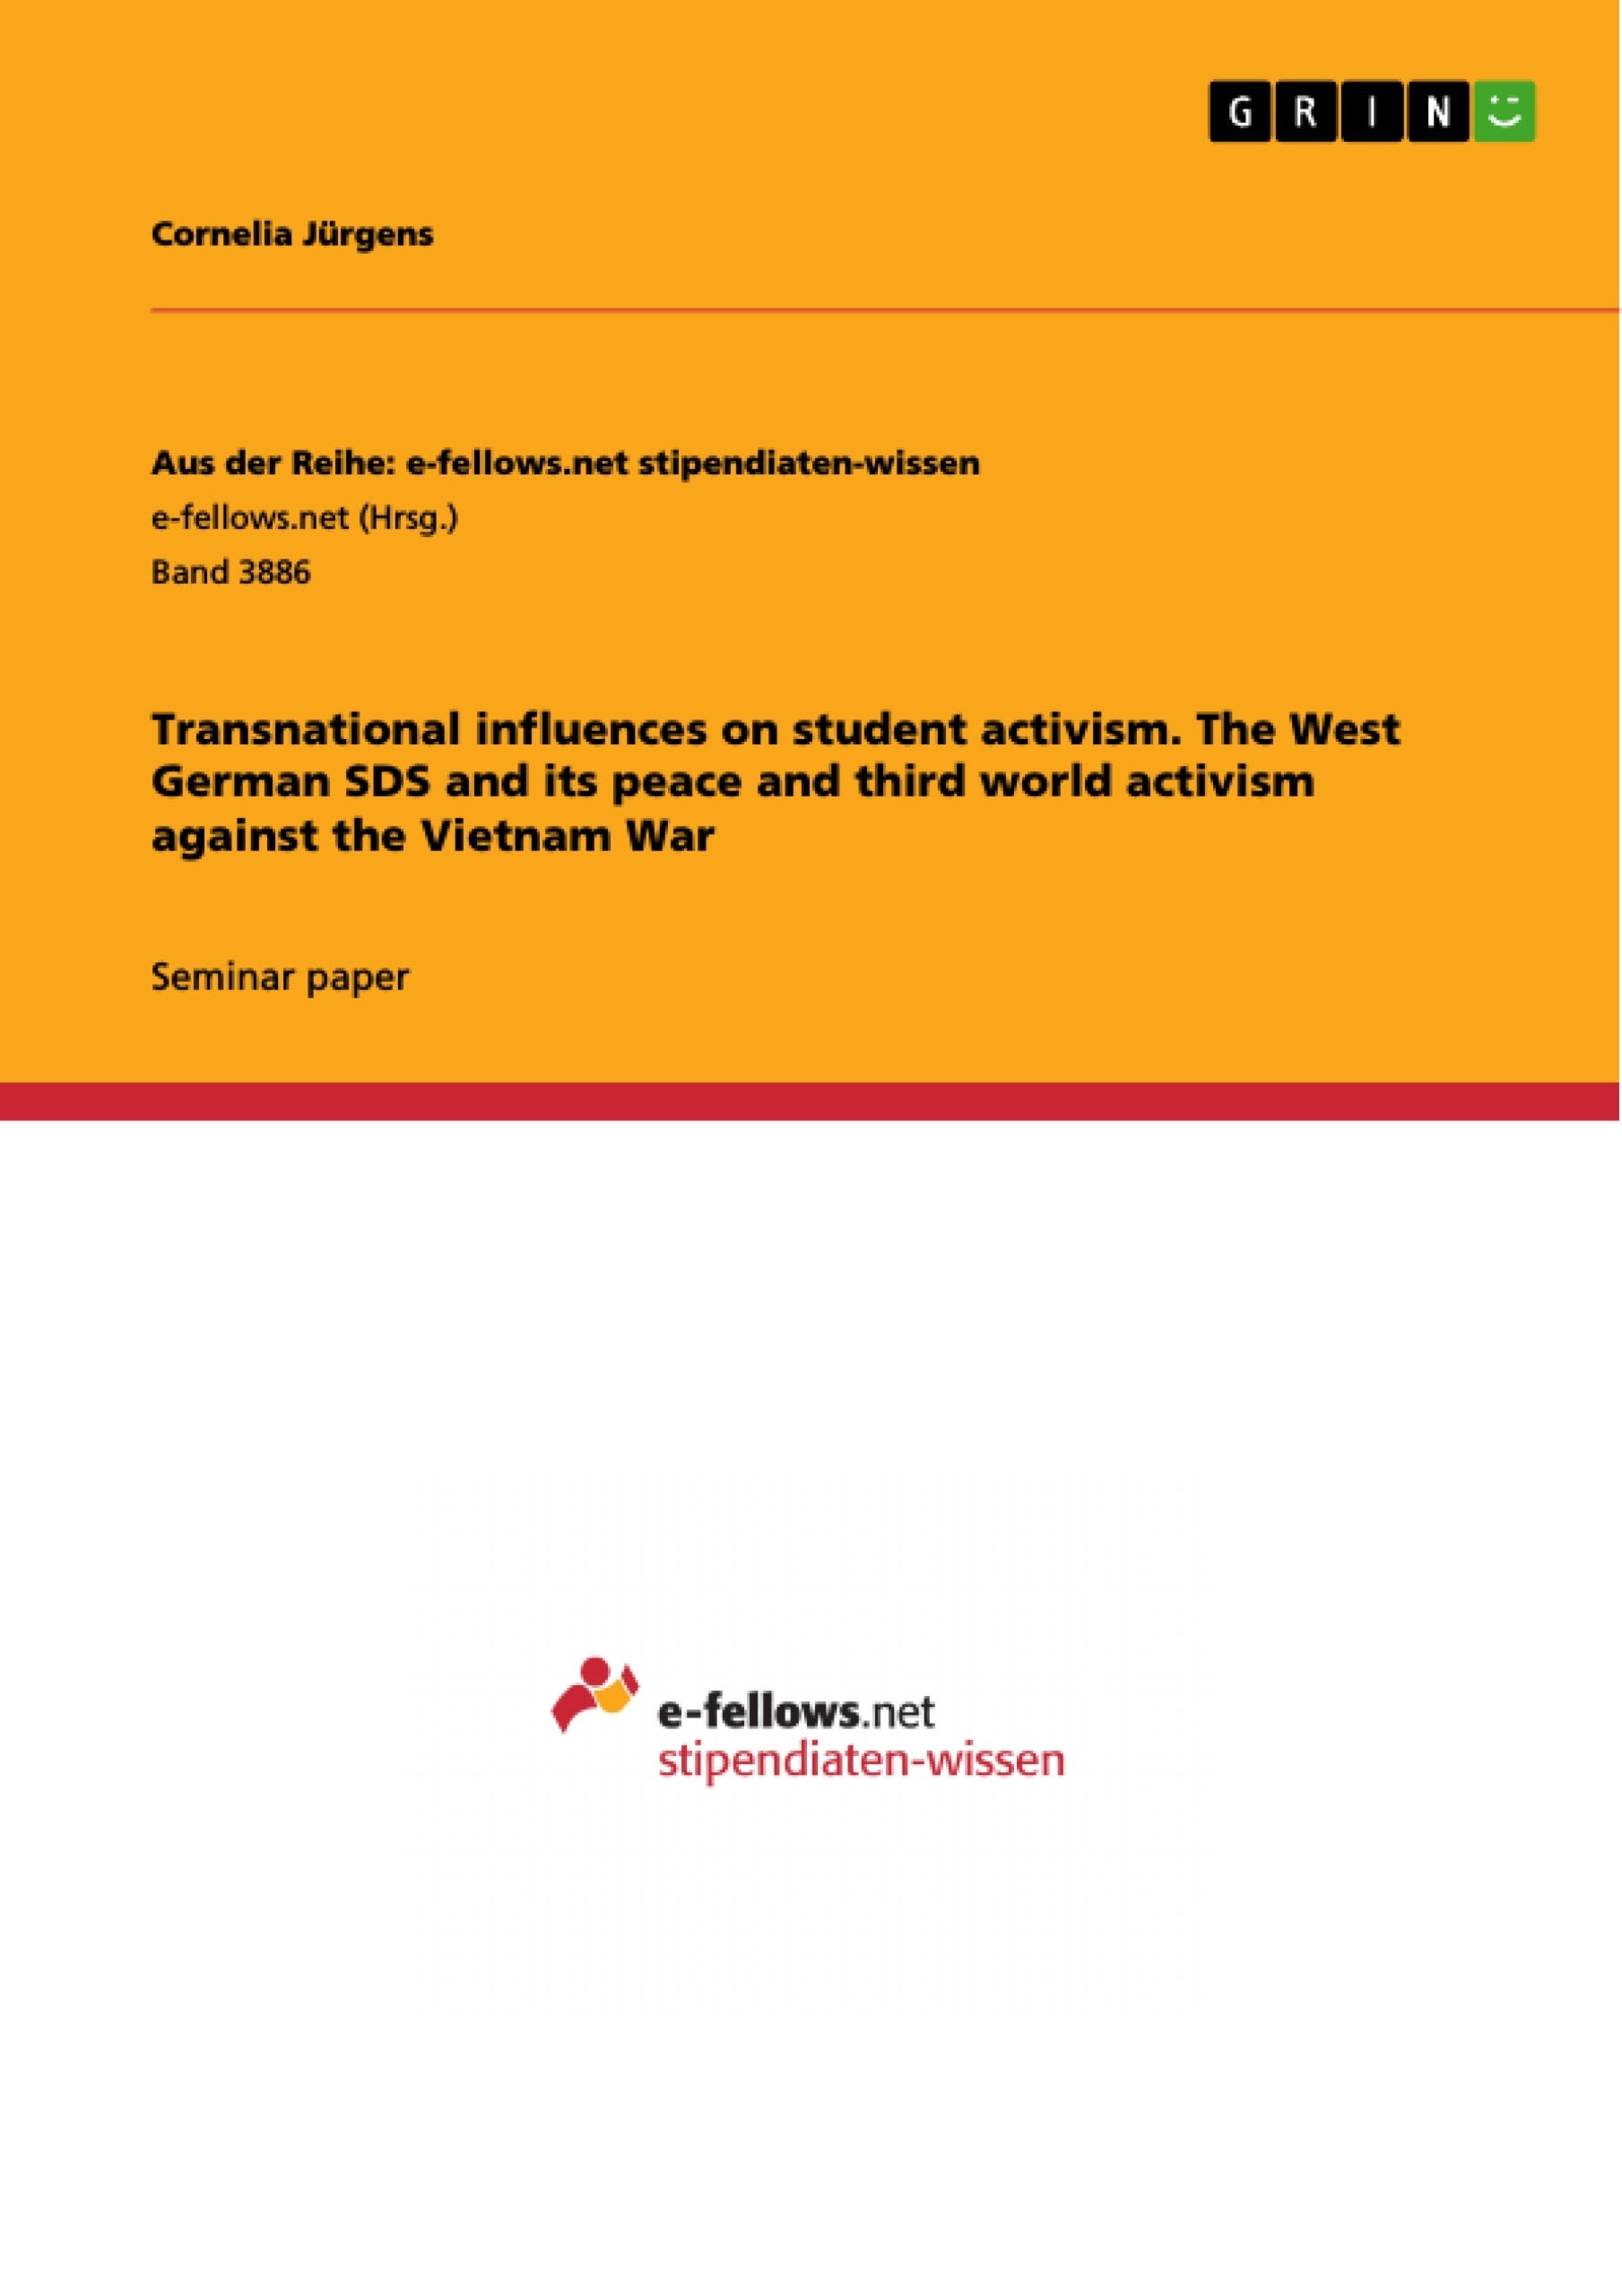 Title: Transnational influences on student activism. The West German SDS and its peace and third world activism against the Vietnam War